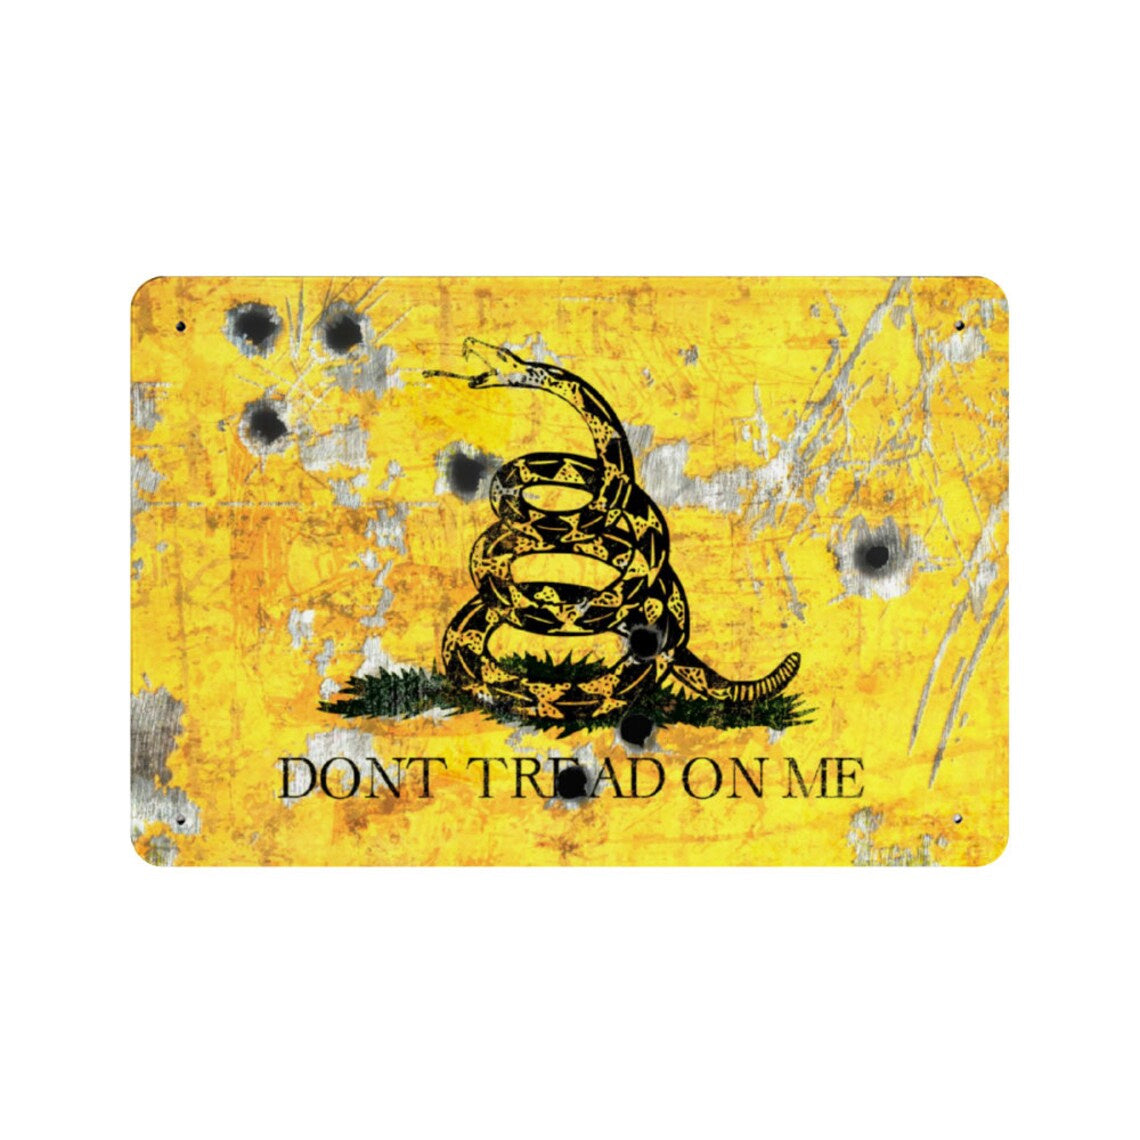 Gadsden Flag on Distressed Metal with Bullet Hole Don’t tread on Me Print on Metal